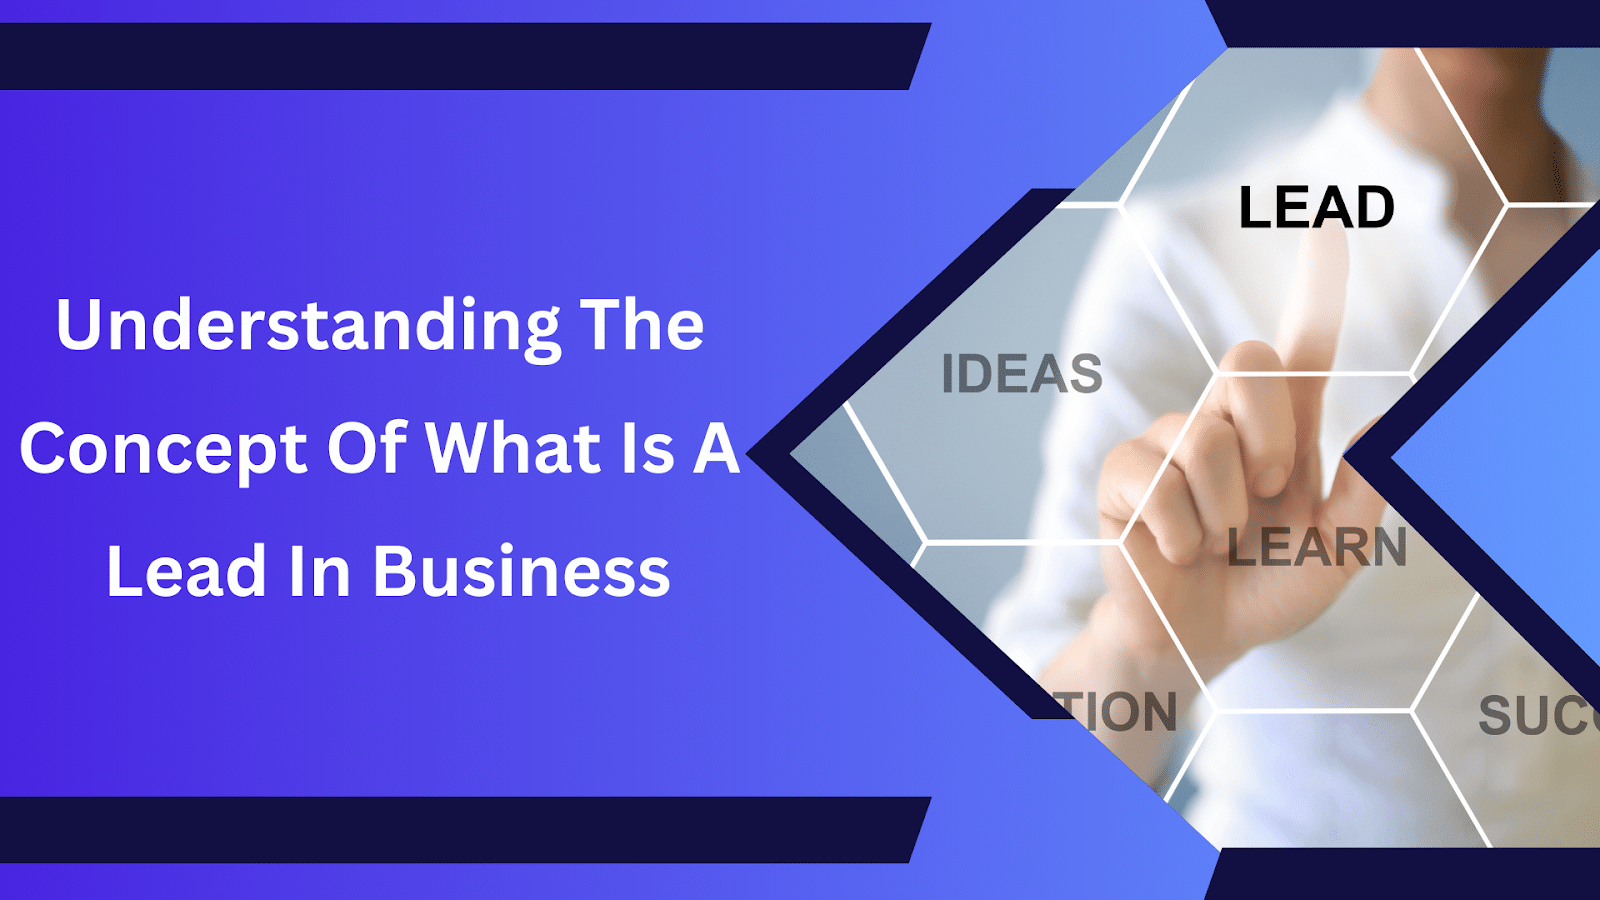 Understanding The Concept of : What Is A Lead in Business